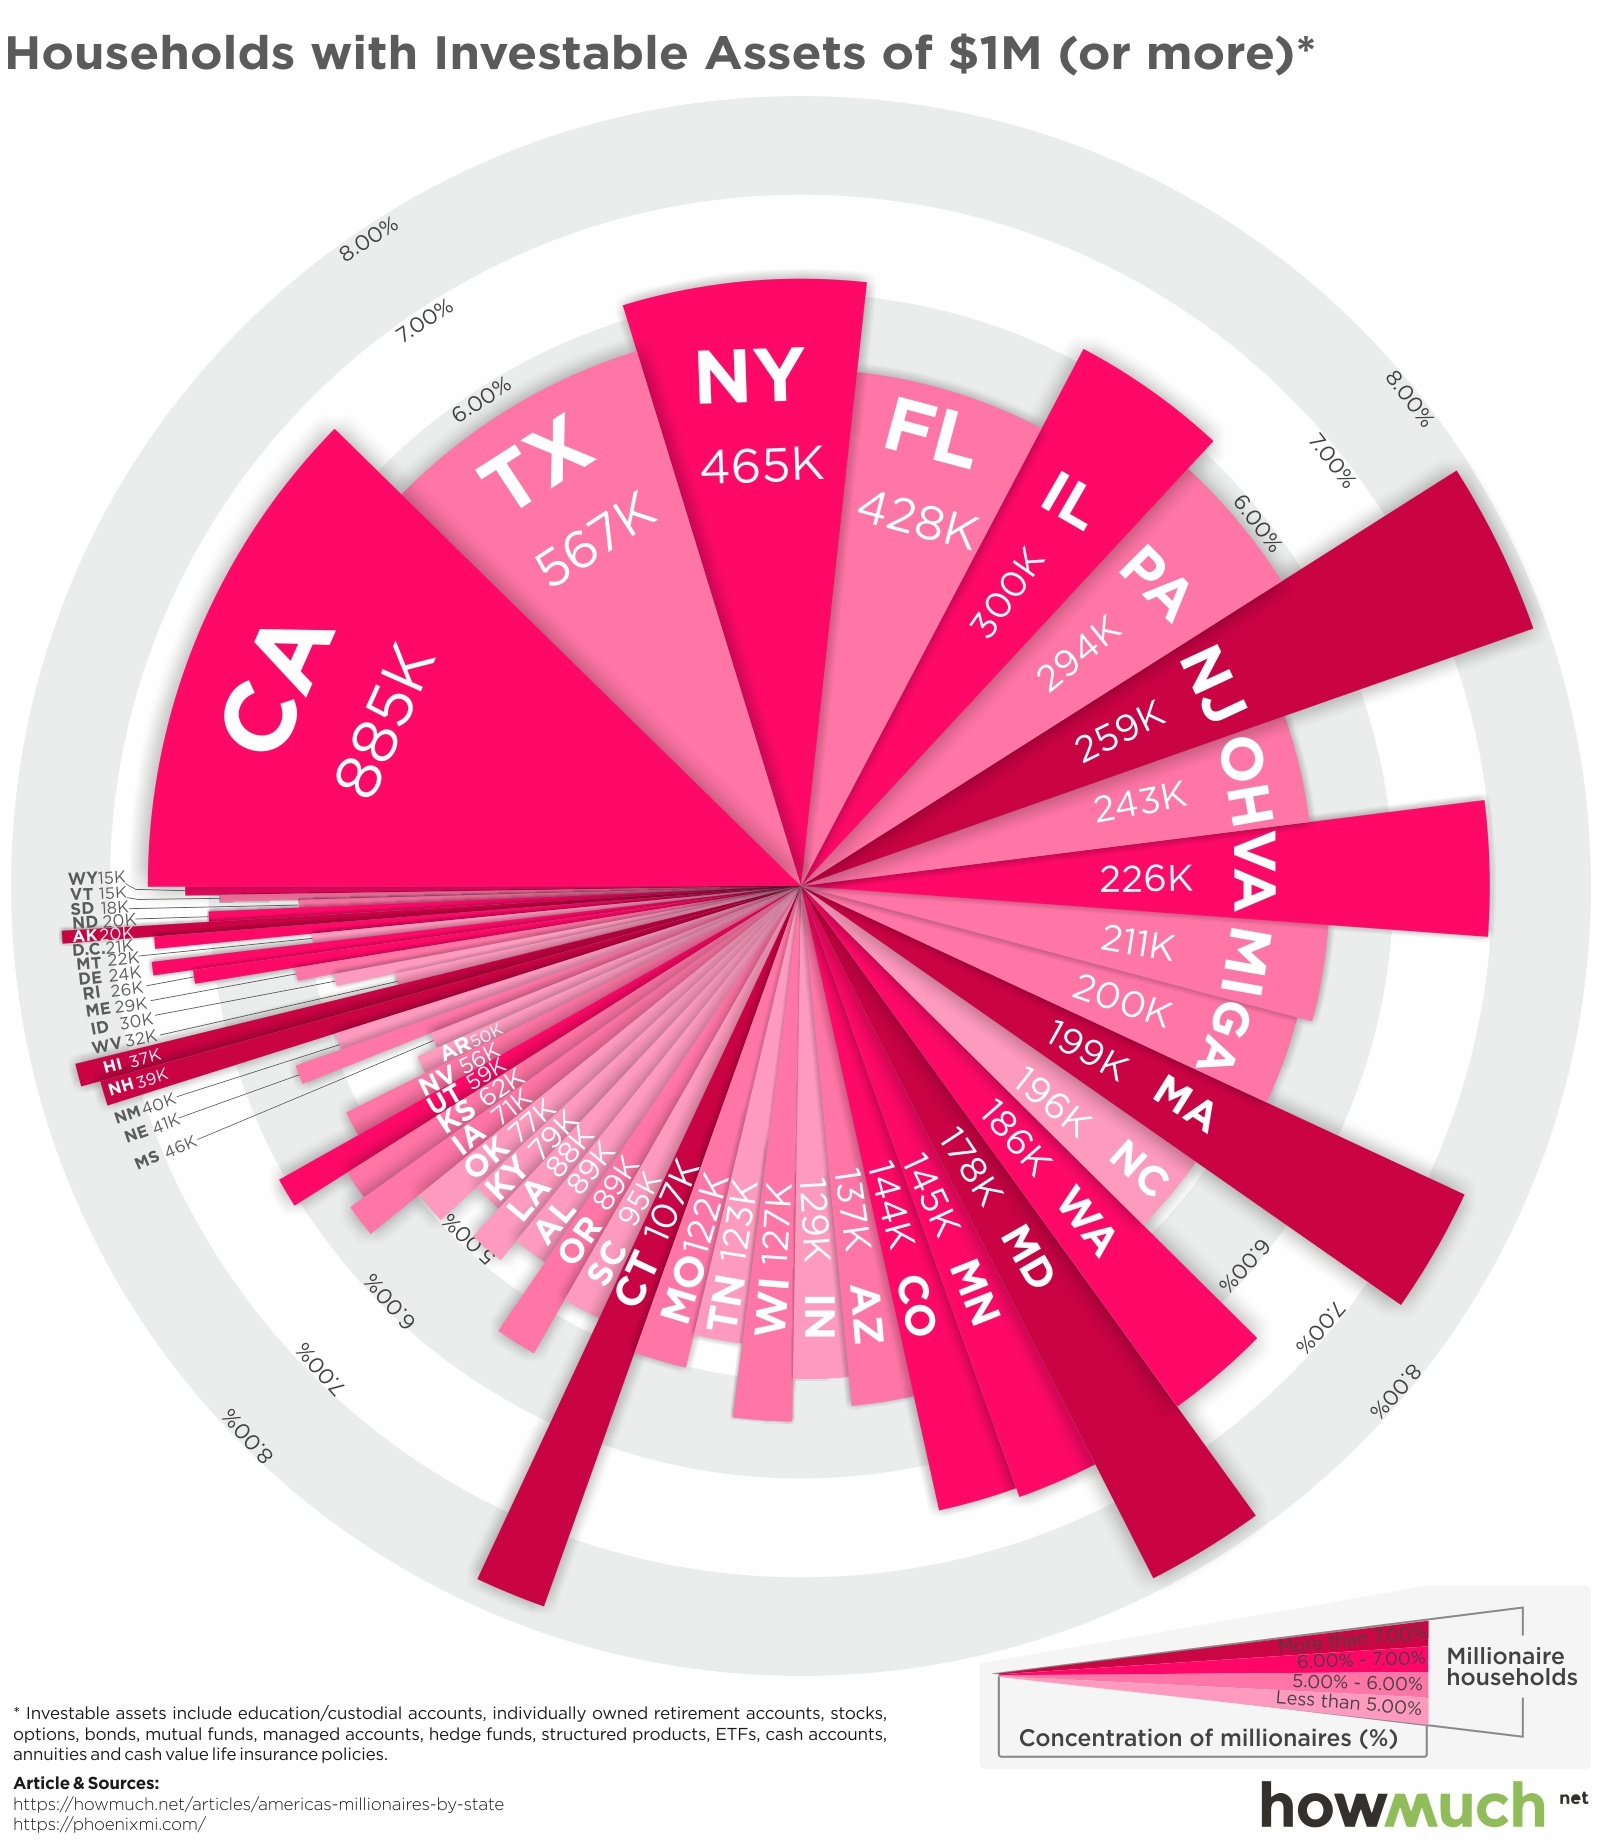 Visualizing U.S. Millionaires by State of Residence